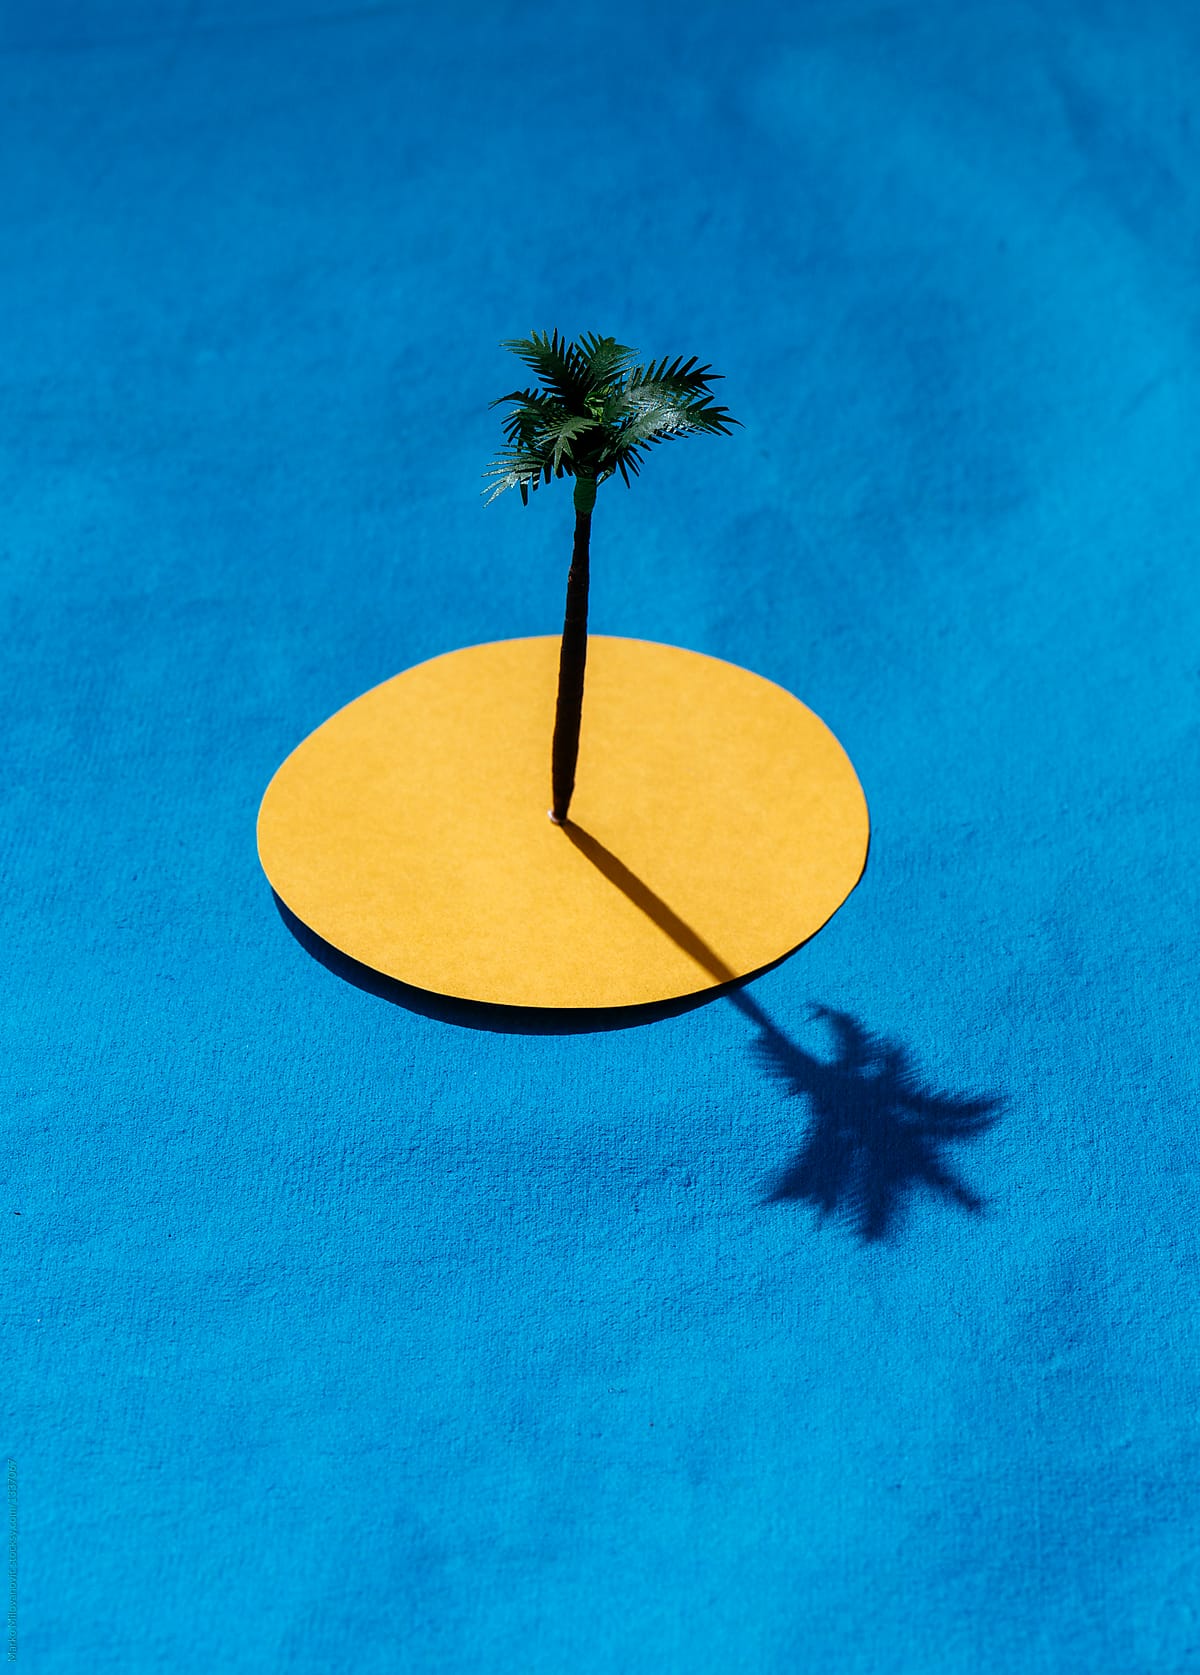 One coconut tree on beach on isolated island / Still life concept